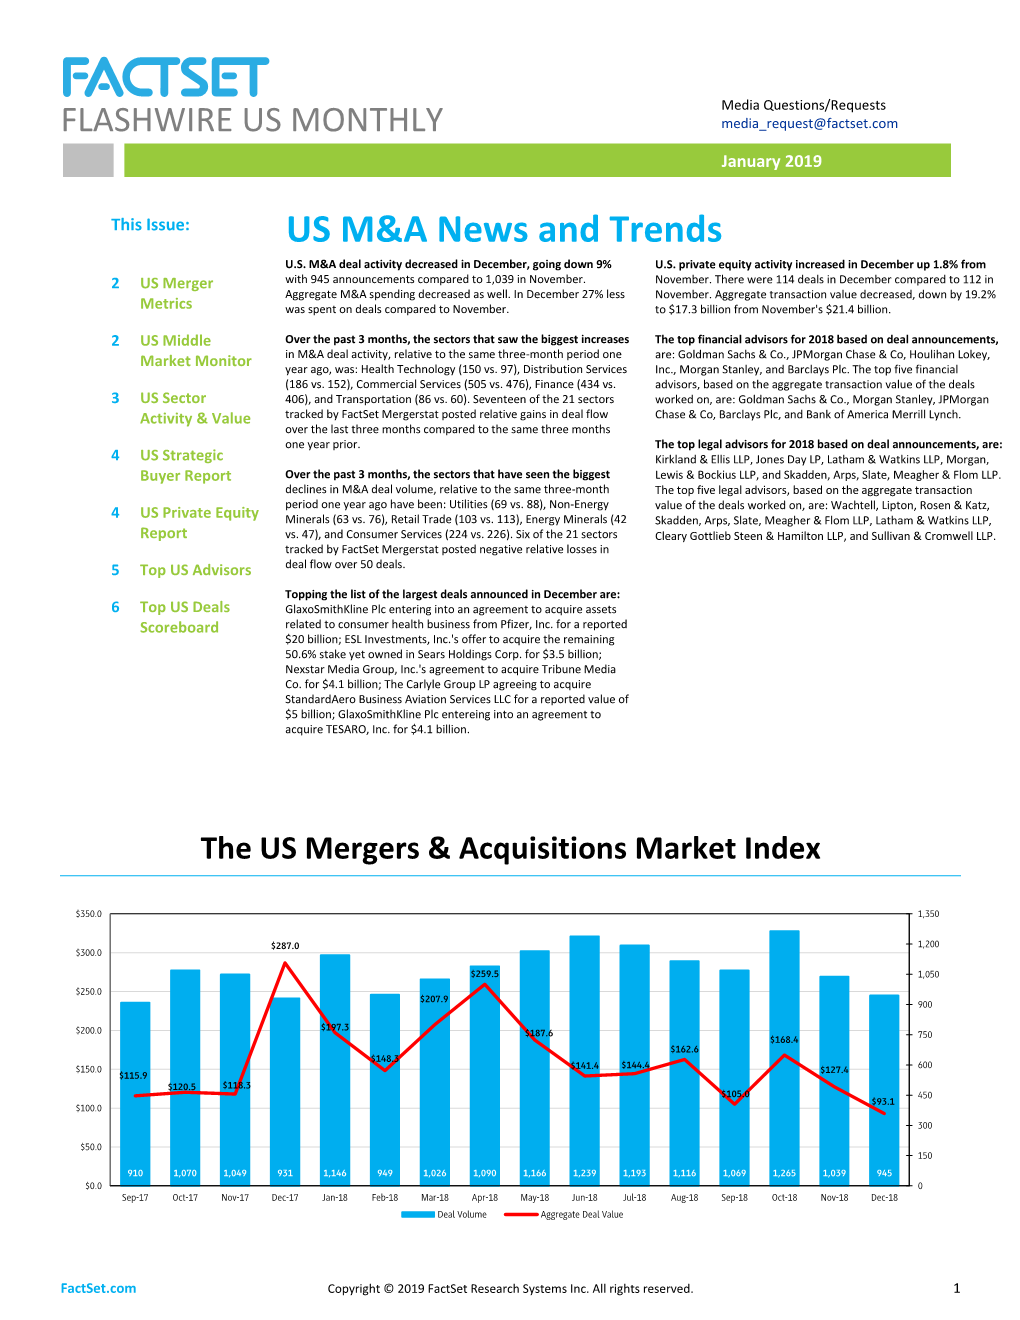 US M&A News and Trends